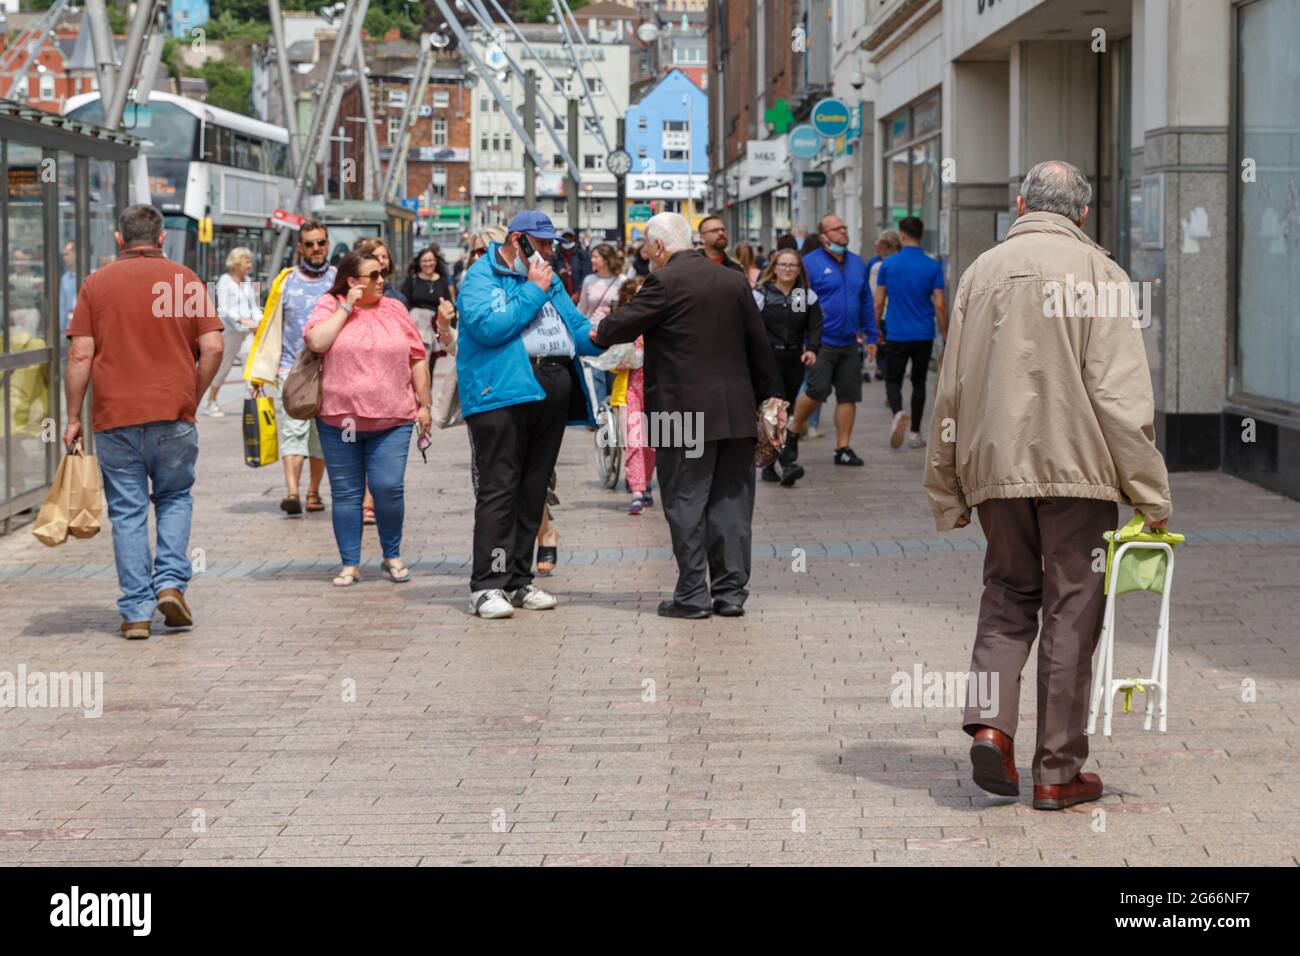 Cork, Ireland. 3rd July, 2021. Shoppers Brave City Despite Thunderstorms Forecasted, Cork, Ireland. Many shoppers braved the city today despite mixed weather forecasts throughout the day. The sun shined on the city for the majority of the afternoon with some scattered showers and as well as forecast thunderstorms in the afternoon. Credit: Damian Coleman/Alamy Live News Stock Photo